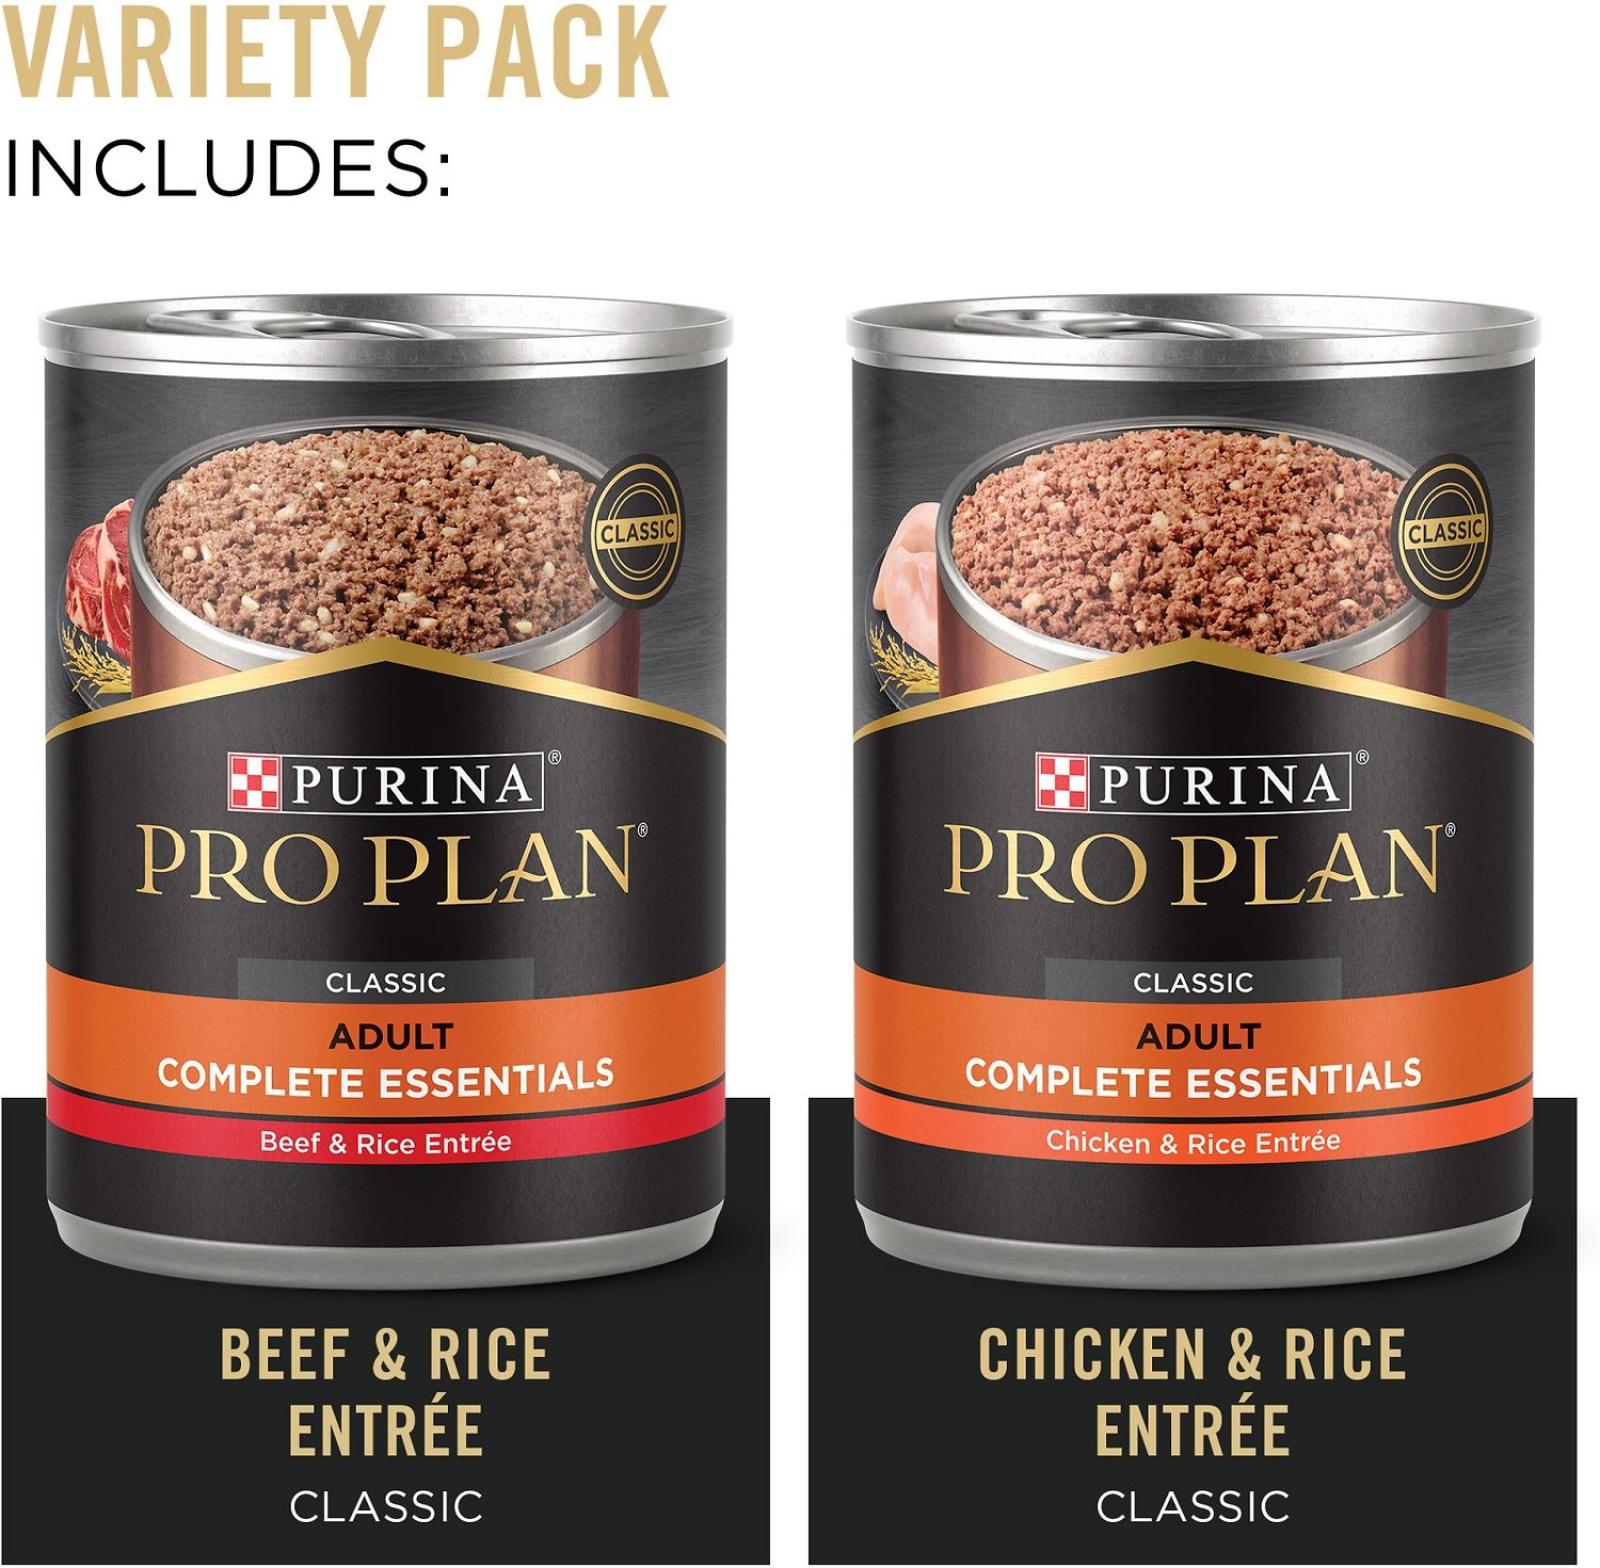 Purina Pro Plan Adult Complete Essentials Variety Pack